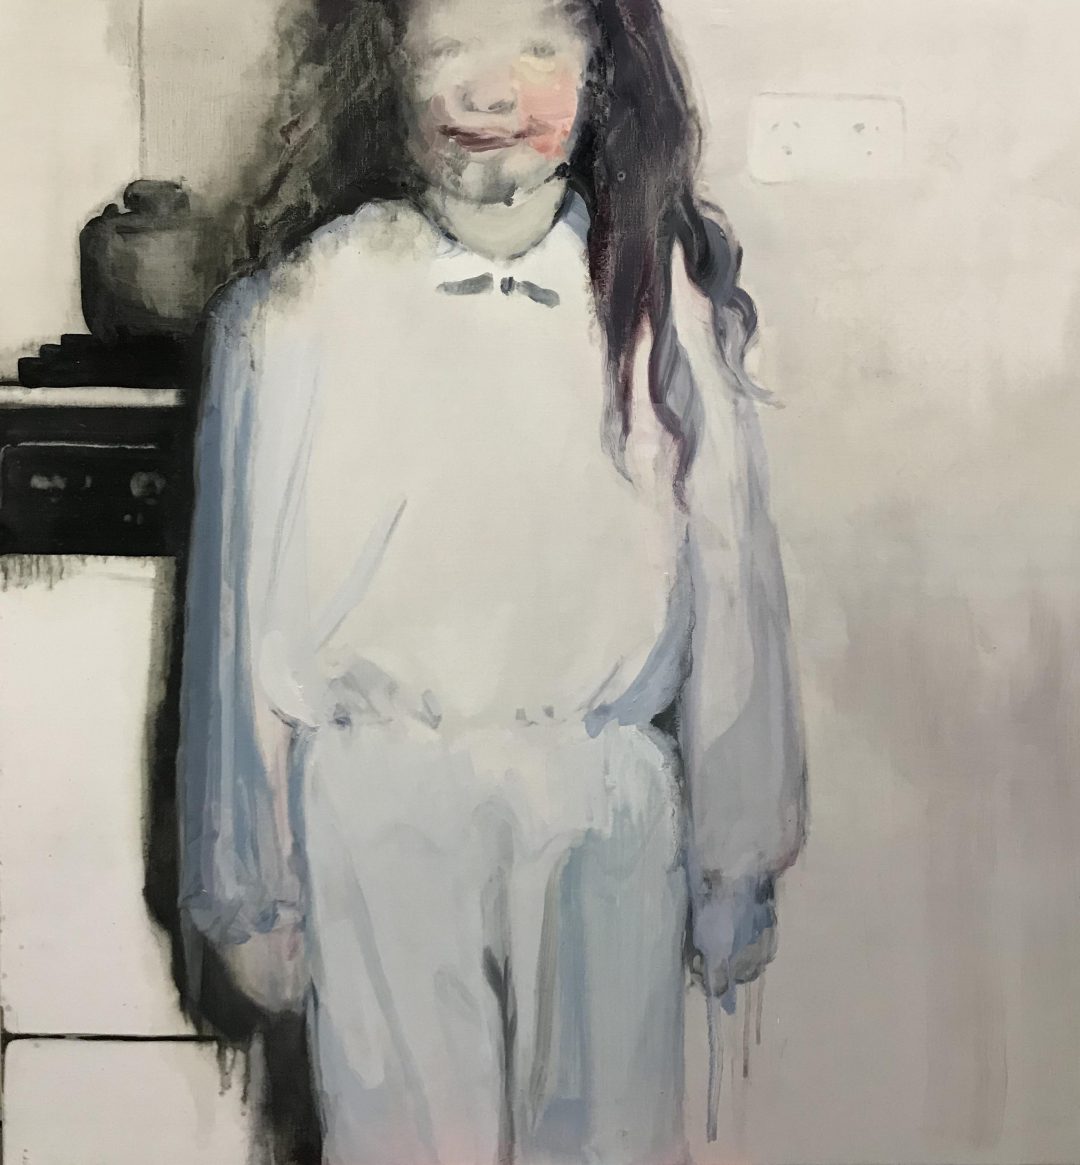 Fiona McMonagle, Toast with jam 2018
oil on linen
77 x 72.5 cm
Winner of the 2019 Local Art Prize
